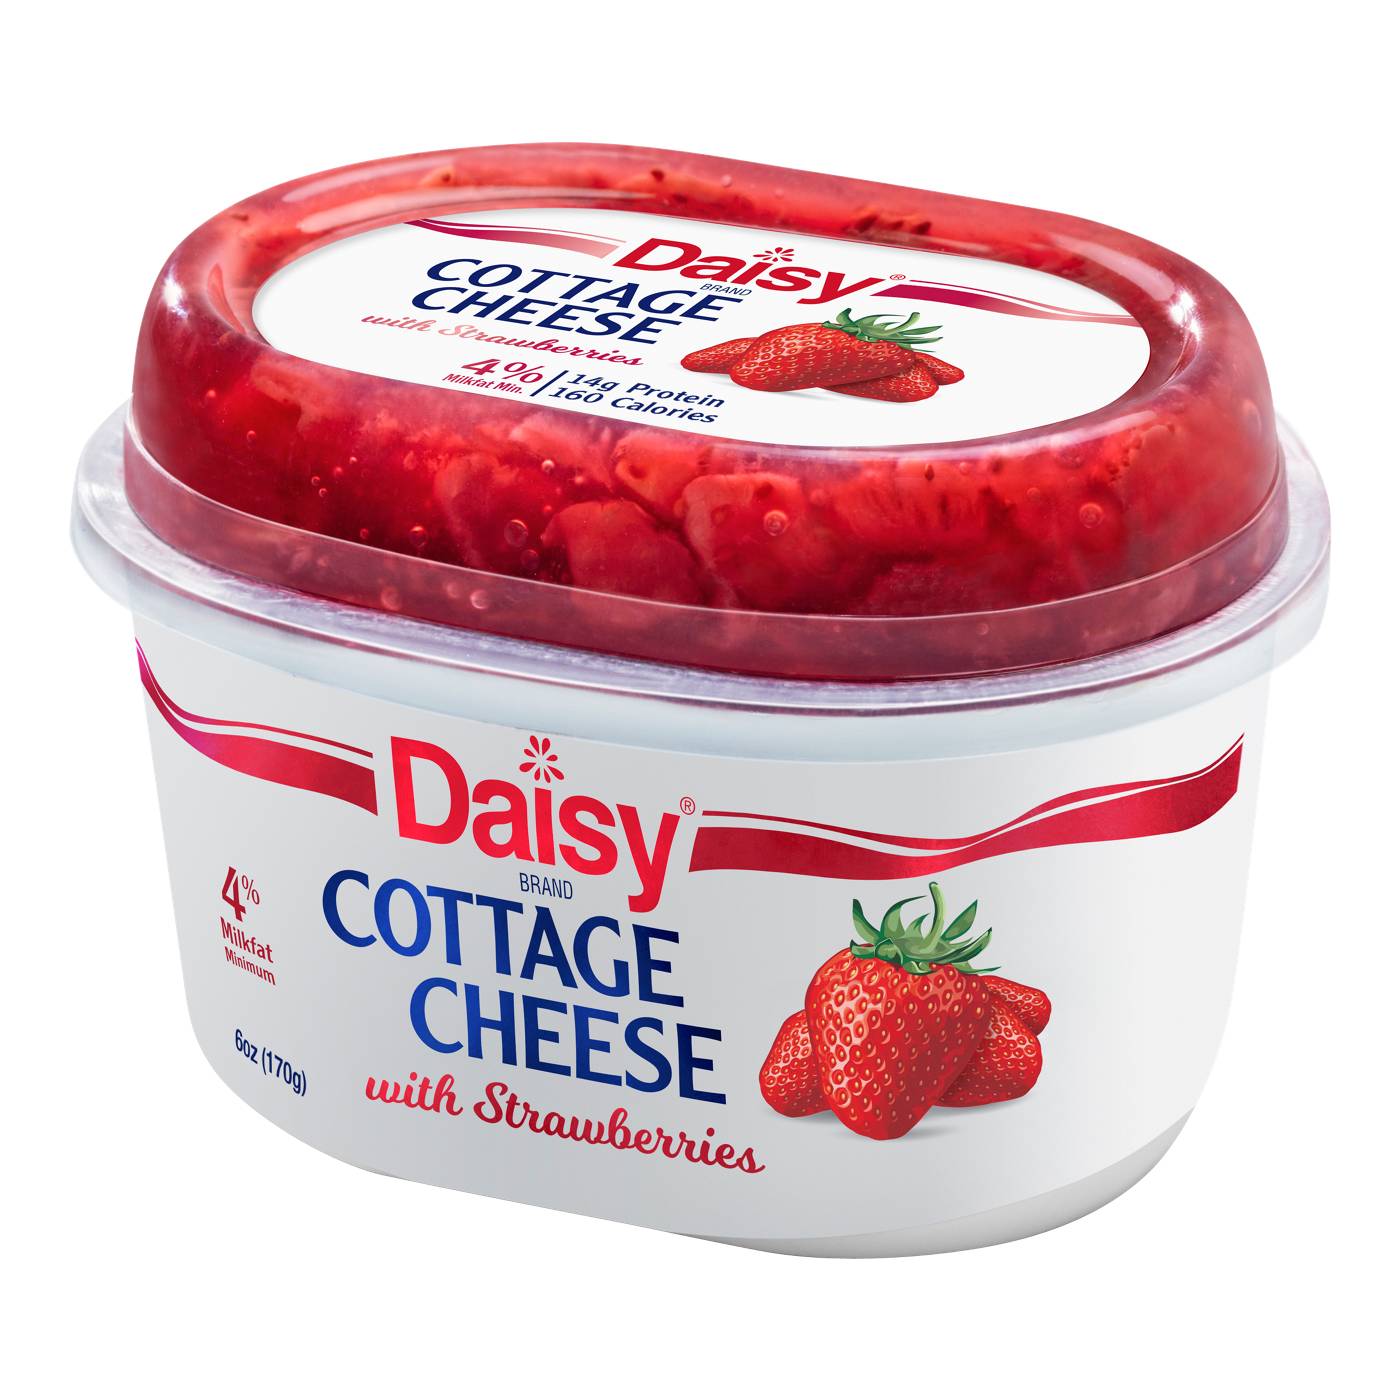 Daisy Cottage Cheese with Strawberries; image 5 of 5